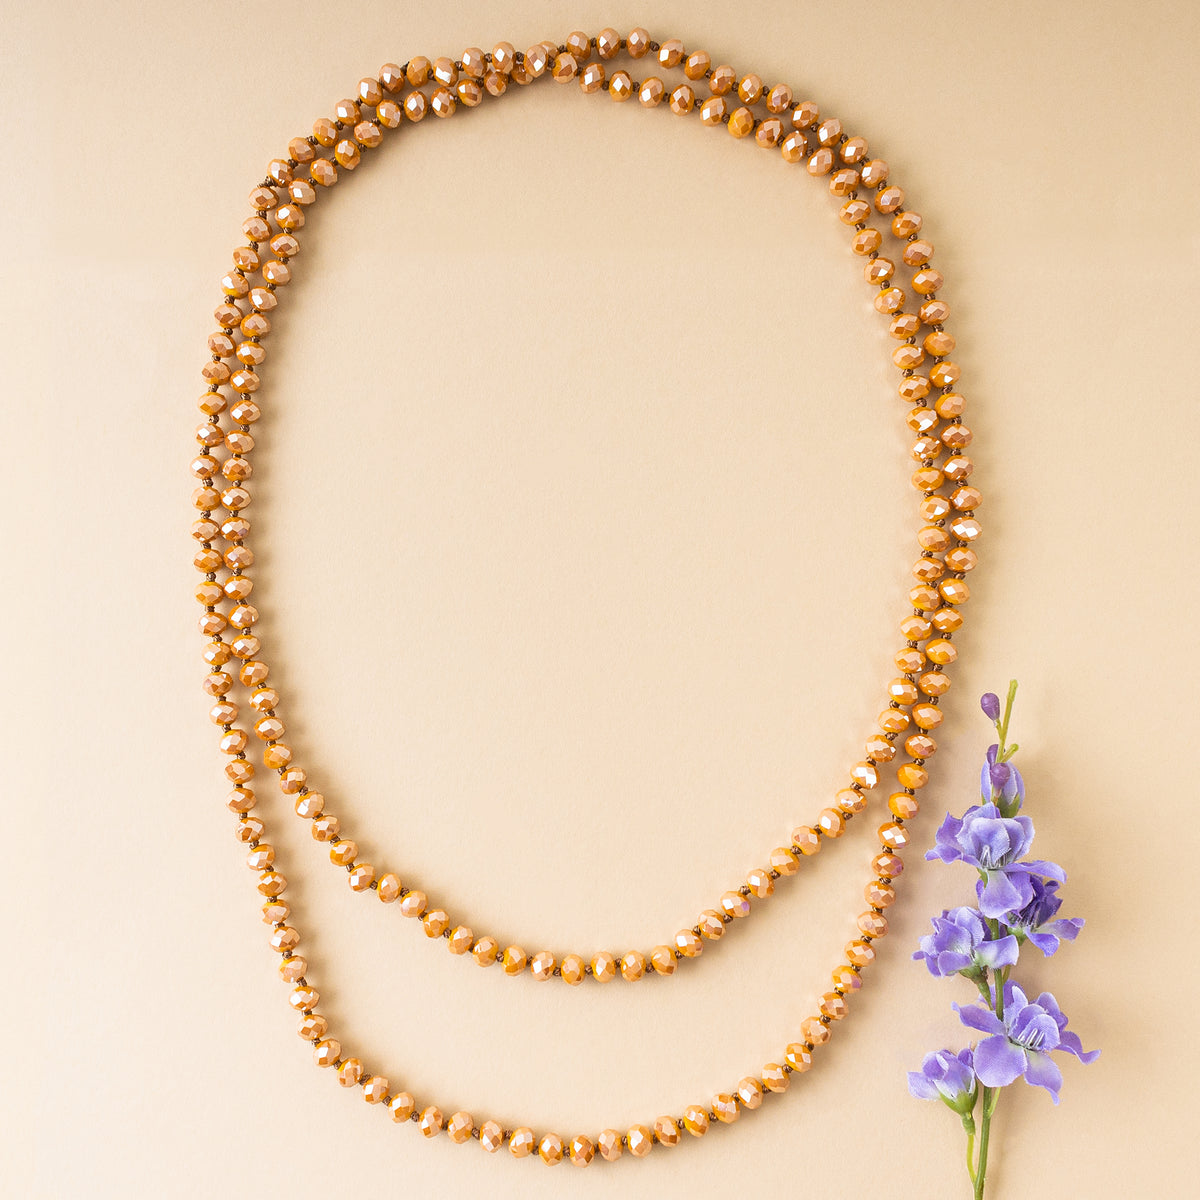 72028-22 - Beaded Necklace - Gold